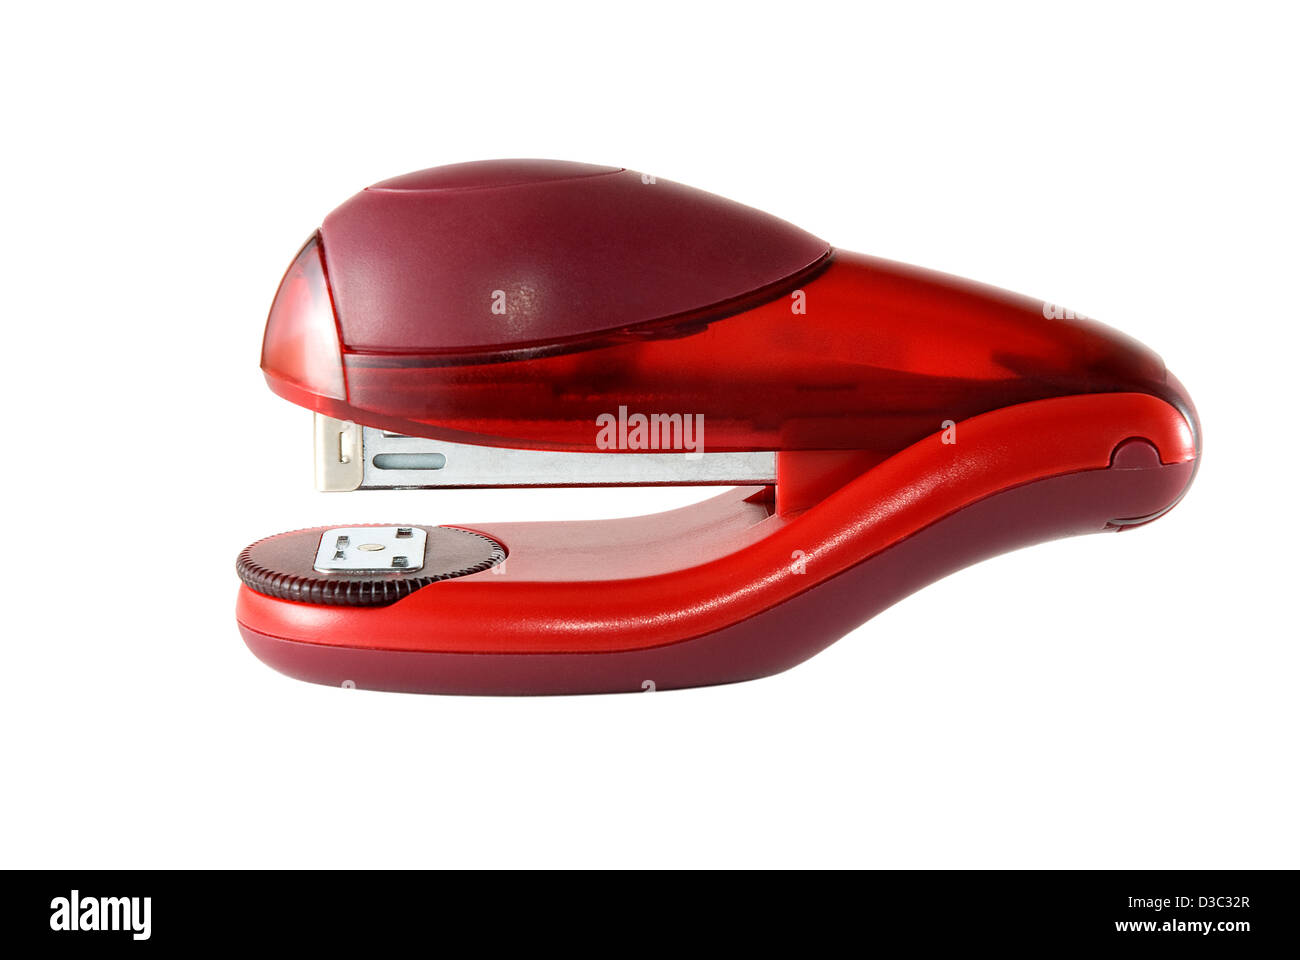 Stapler of red color on a white background Stock Photo